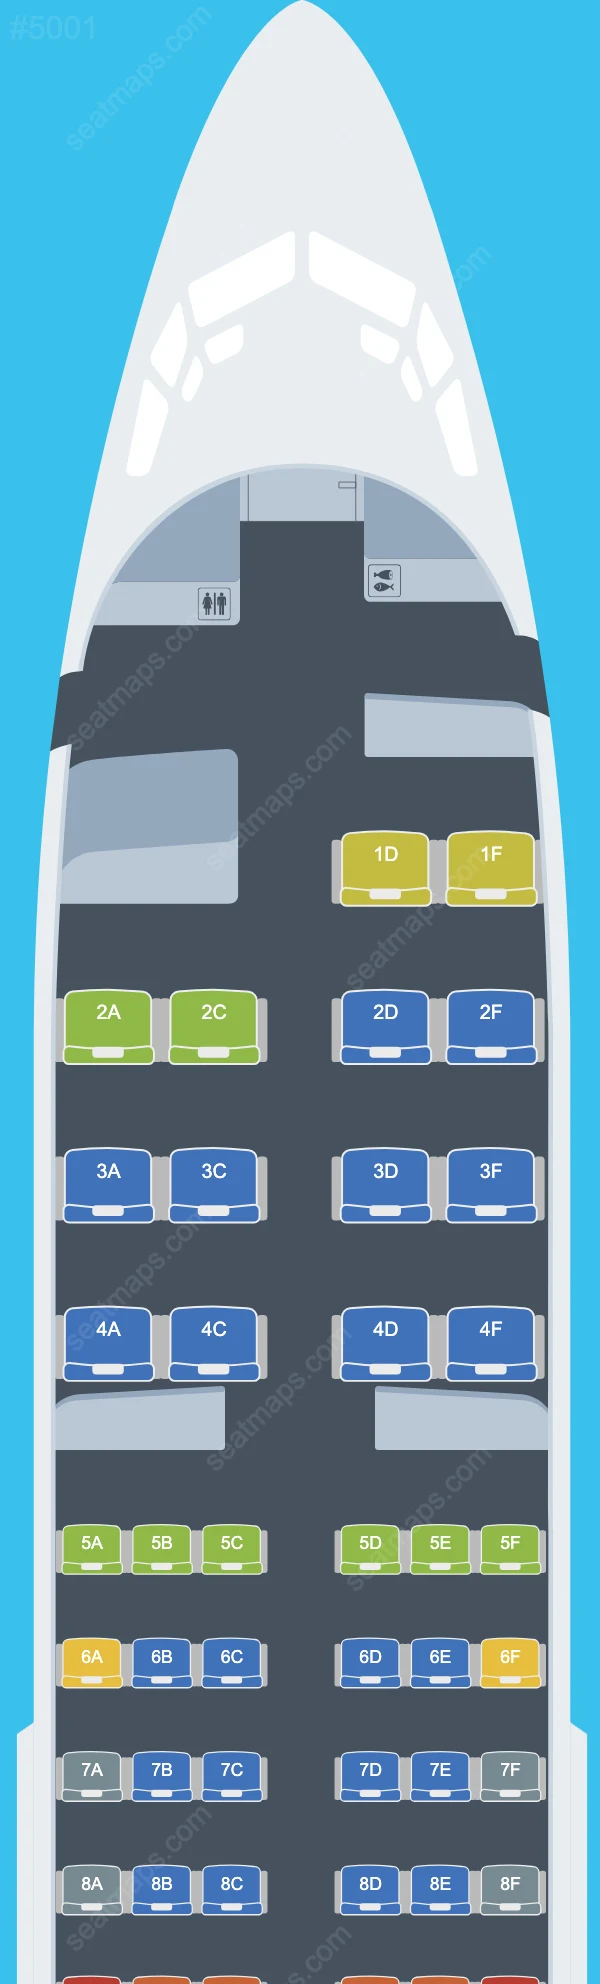 Tarom Boeing 737-700 seatmap mobile preview